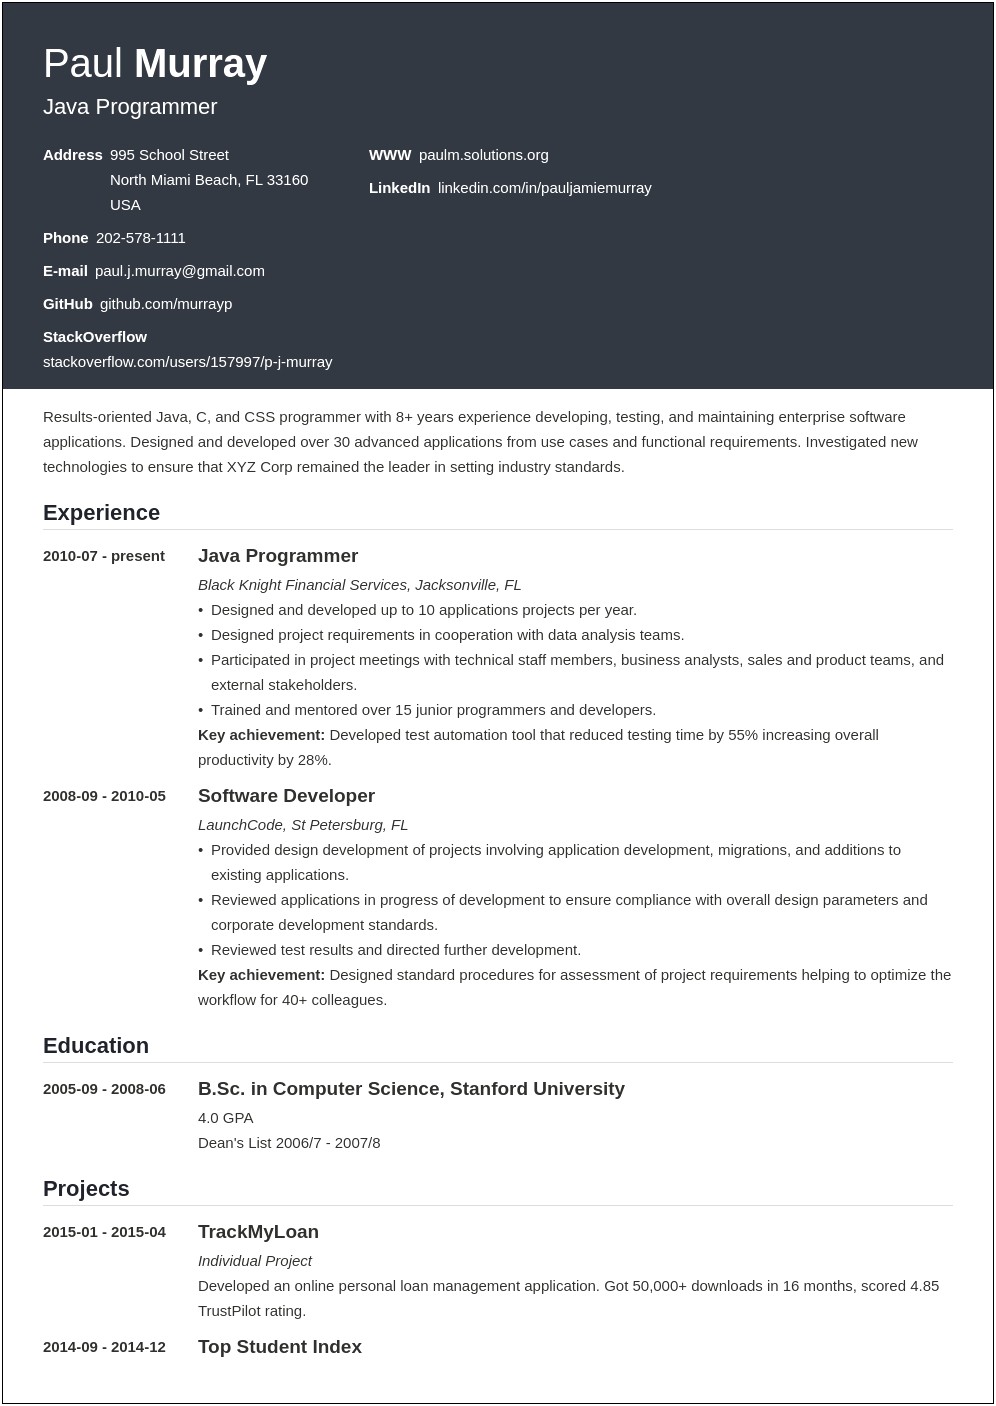 Computer Science School Projects On Resume